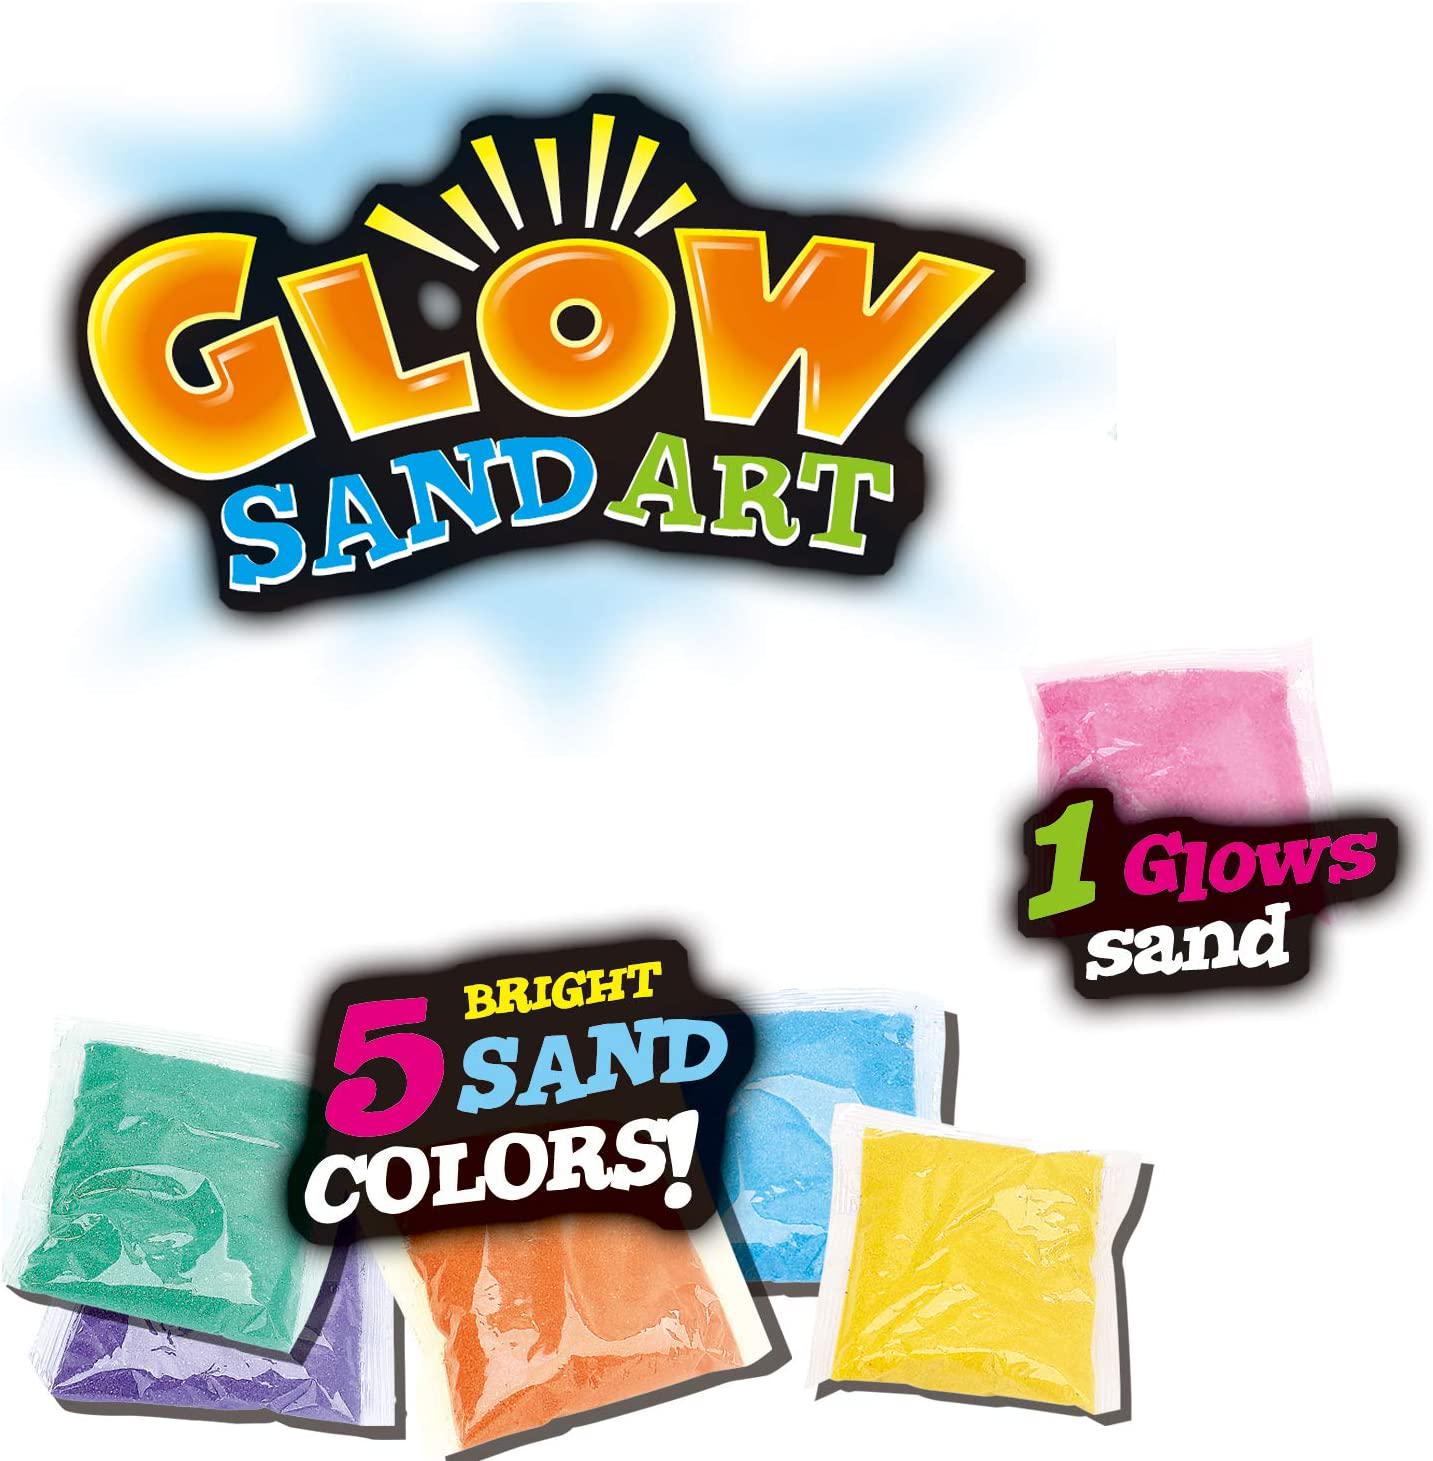 Liberty Imports, Liberty Imports Glow in The Dark Sand Art Kit for Kids - DIY Arts and Crafts Activity for Kids - Includes 5 Sand Colors, 1 Glow Sand, 5 Sand Art Bottles, and More